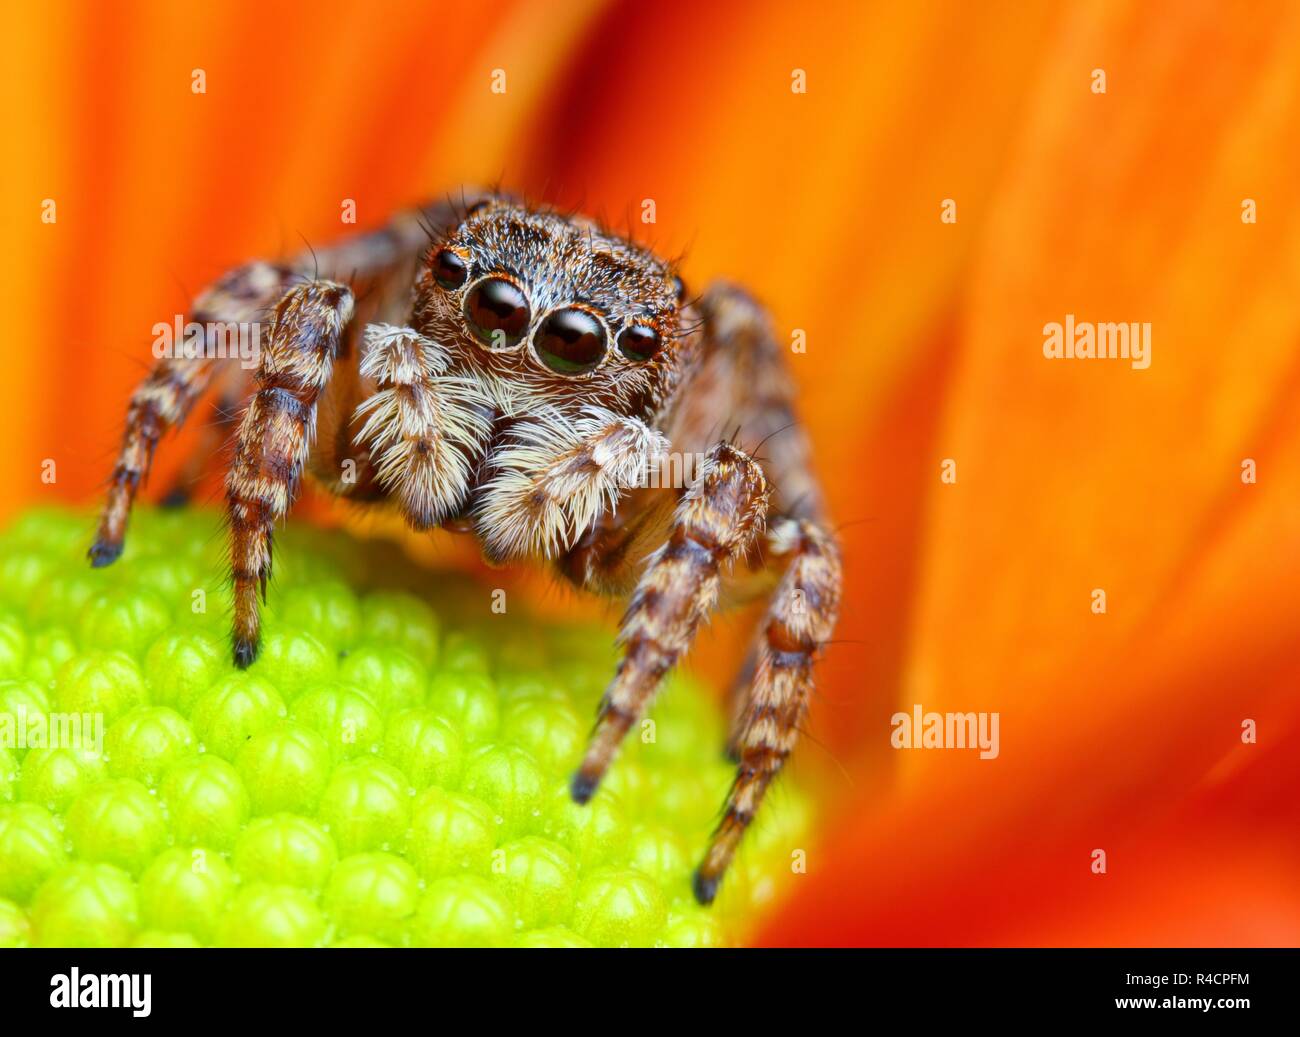 Beautiful close-up of a Jumping spider. Stock Photo